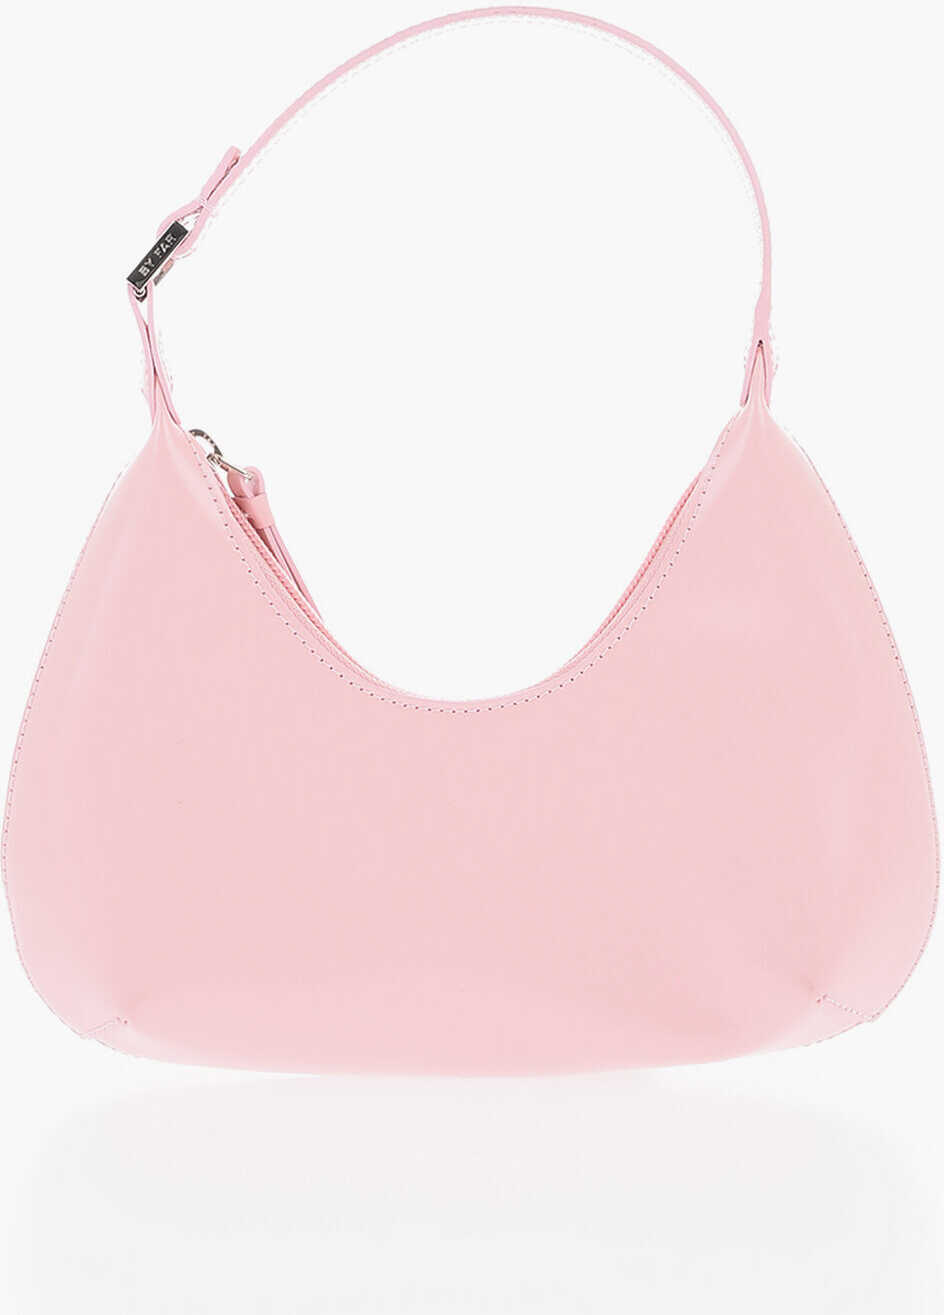 BY FAR Semi-Patent Leather Baby Amber Hobo Bag Pink